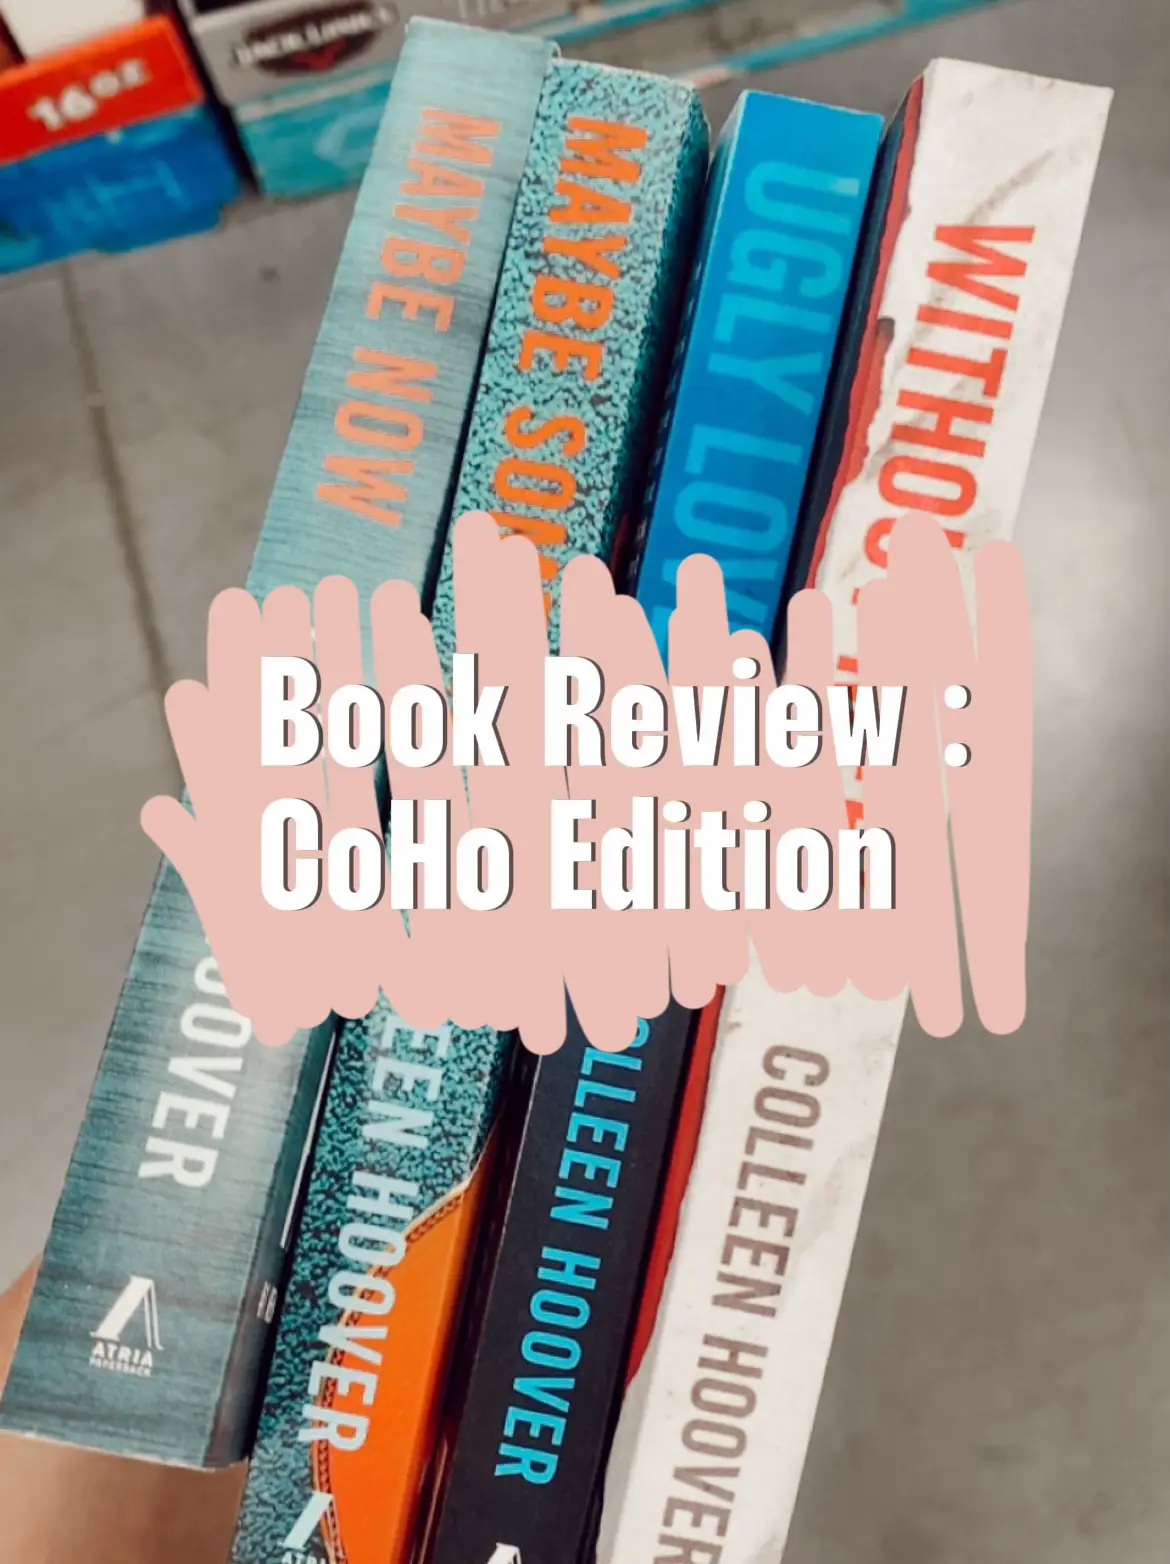 Book Review of “Verity” by Colleen Hoover, by HaveYouRead_